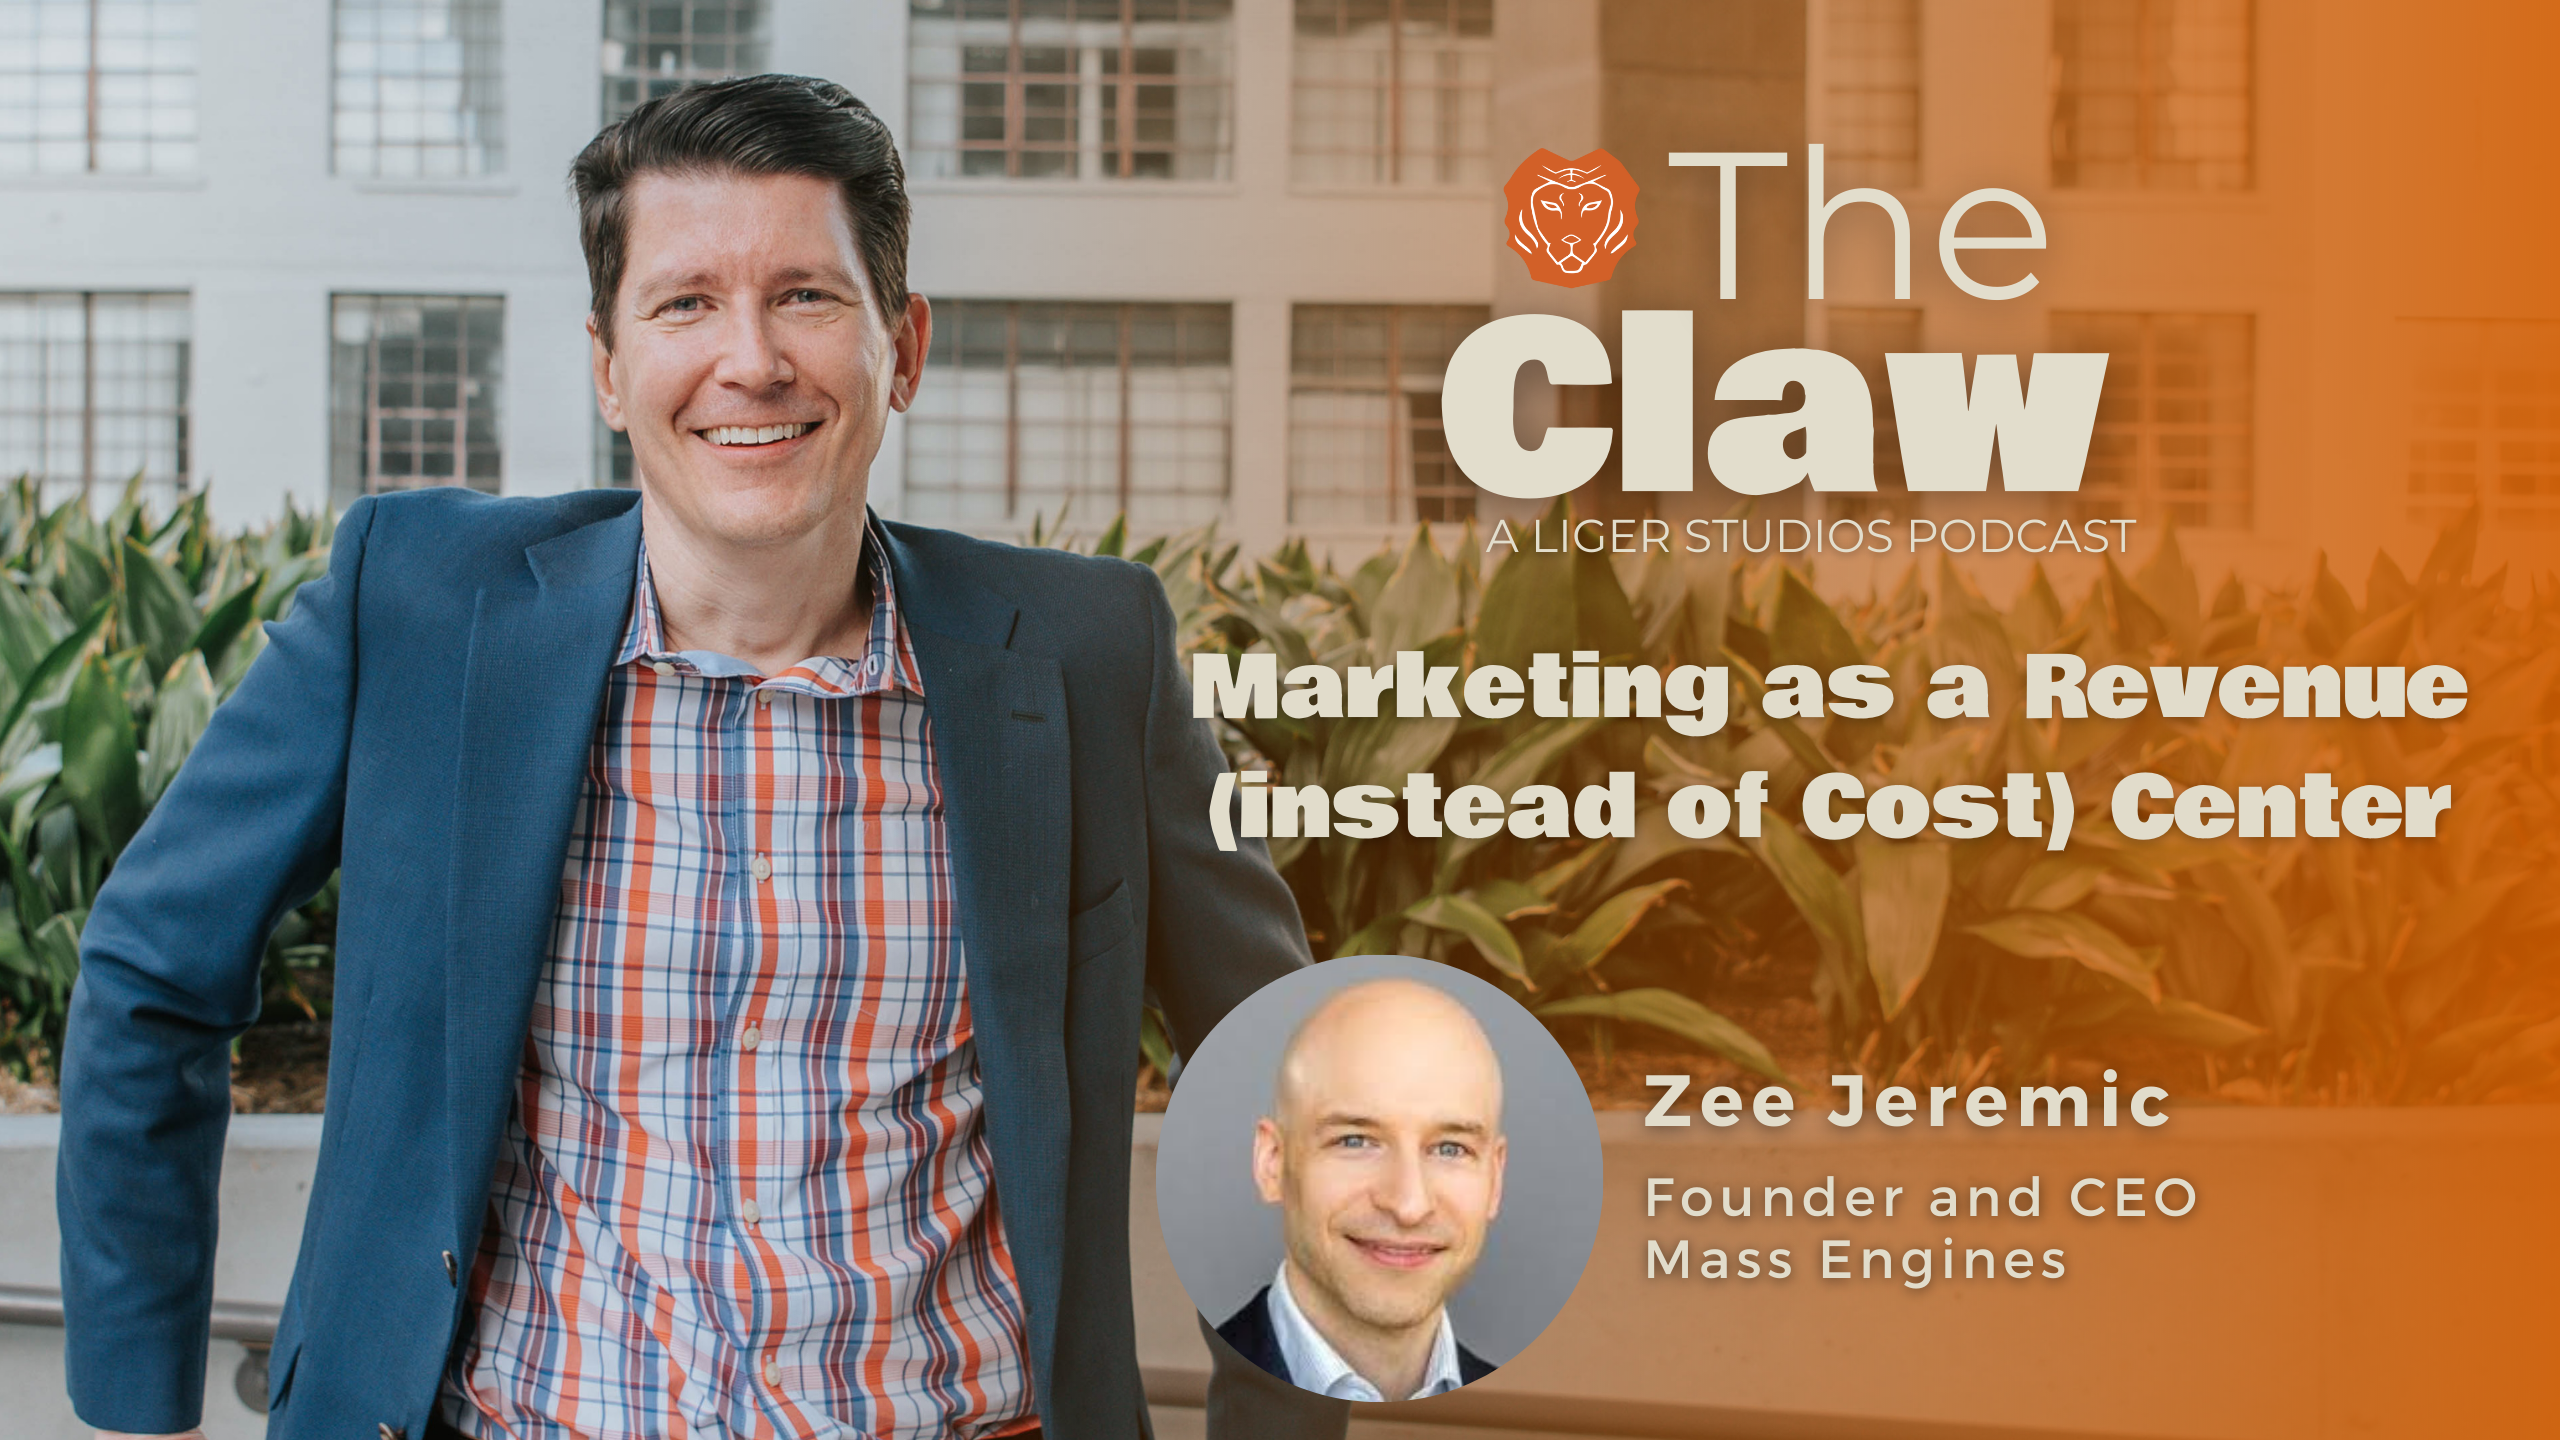 The Claw Podcast: Marketing as a Revenue (instead of Cost) Center with Zee Jeremic